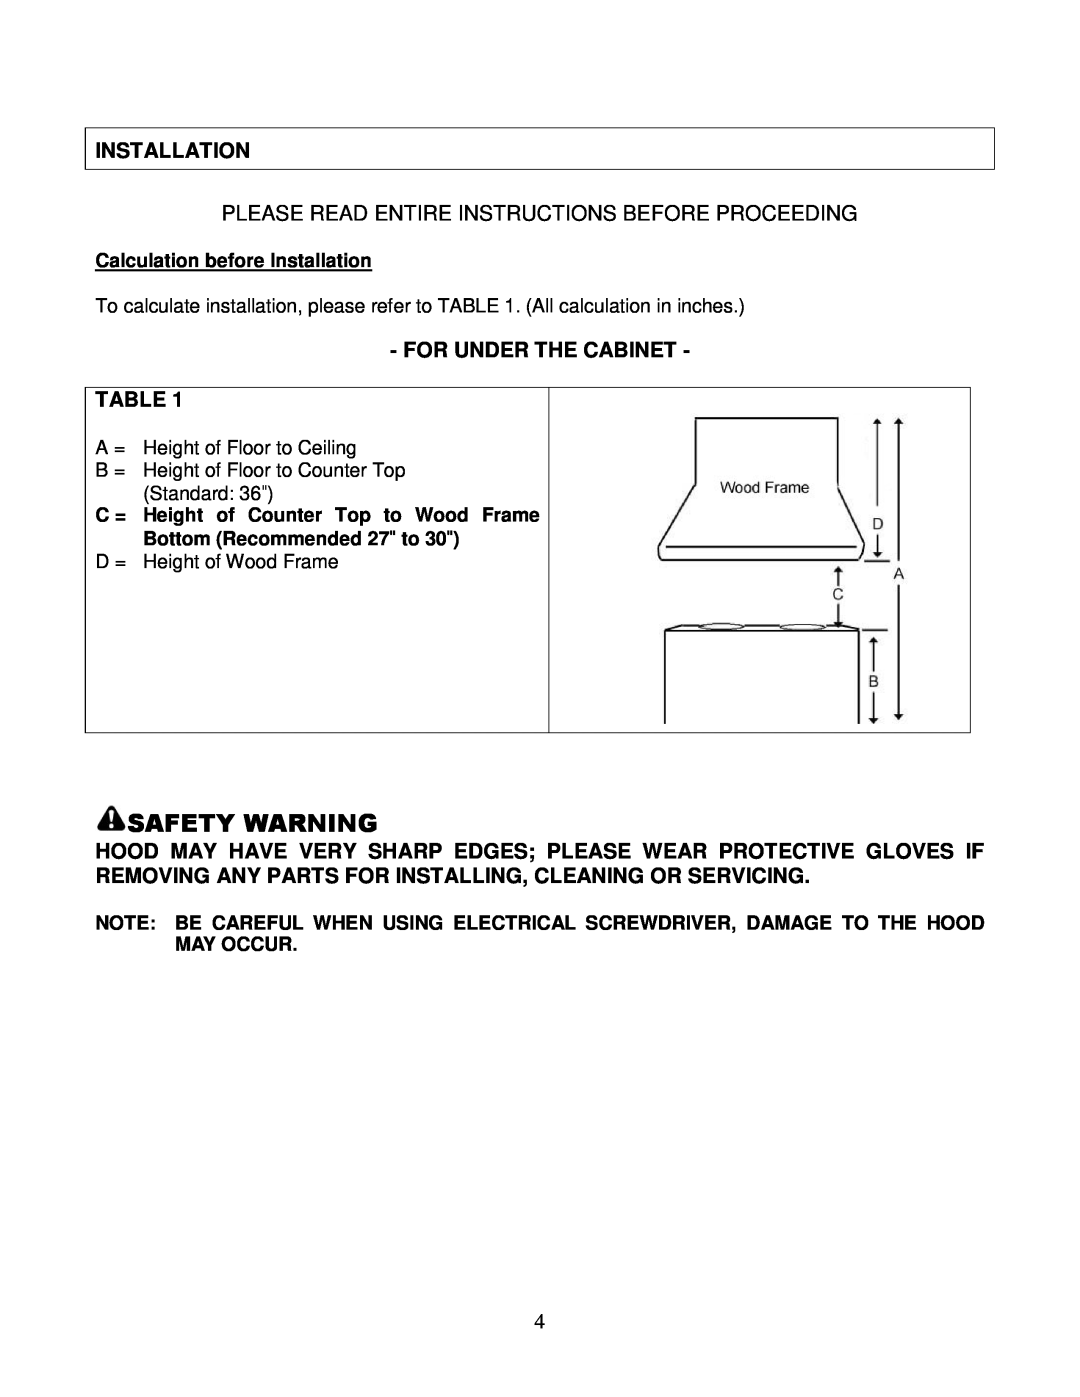 Kobe Range Hoods IN-026 SERIES Safety Warning, Installation, Please Read Entire Instructions Before Proceeding 